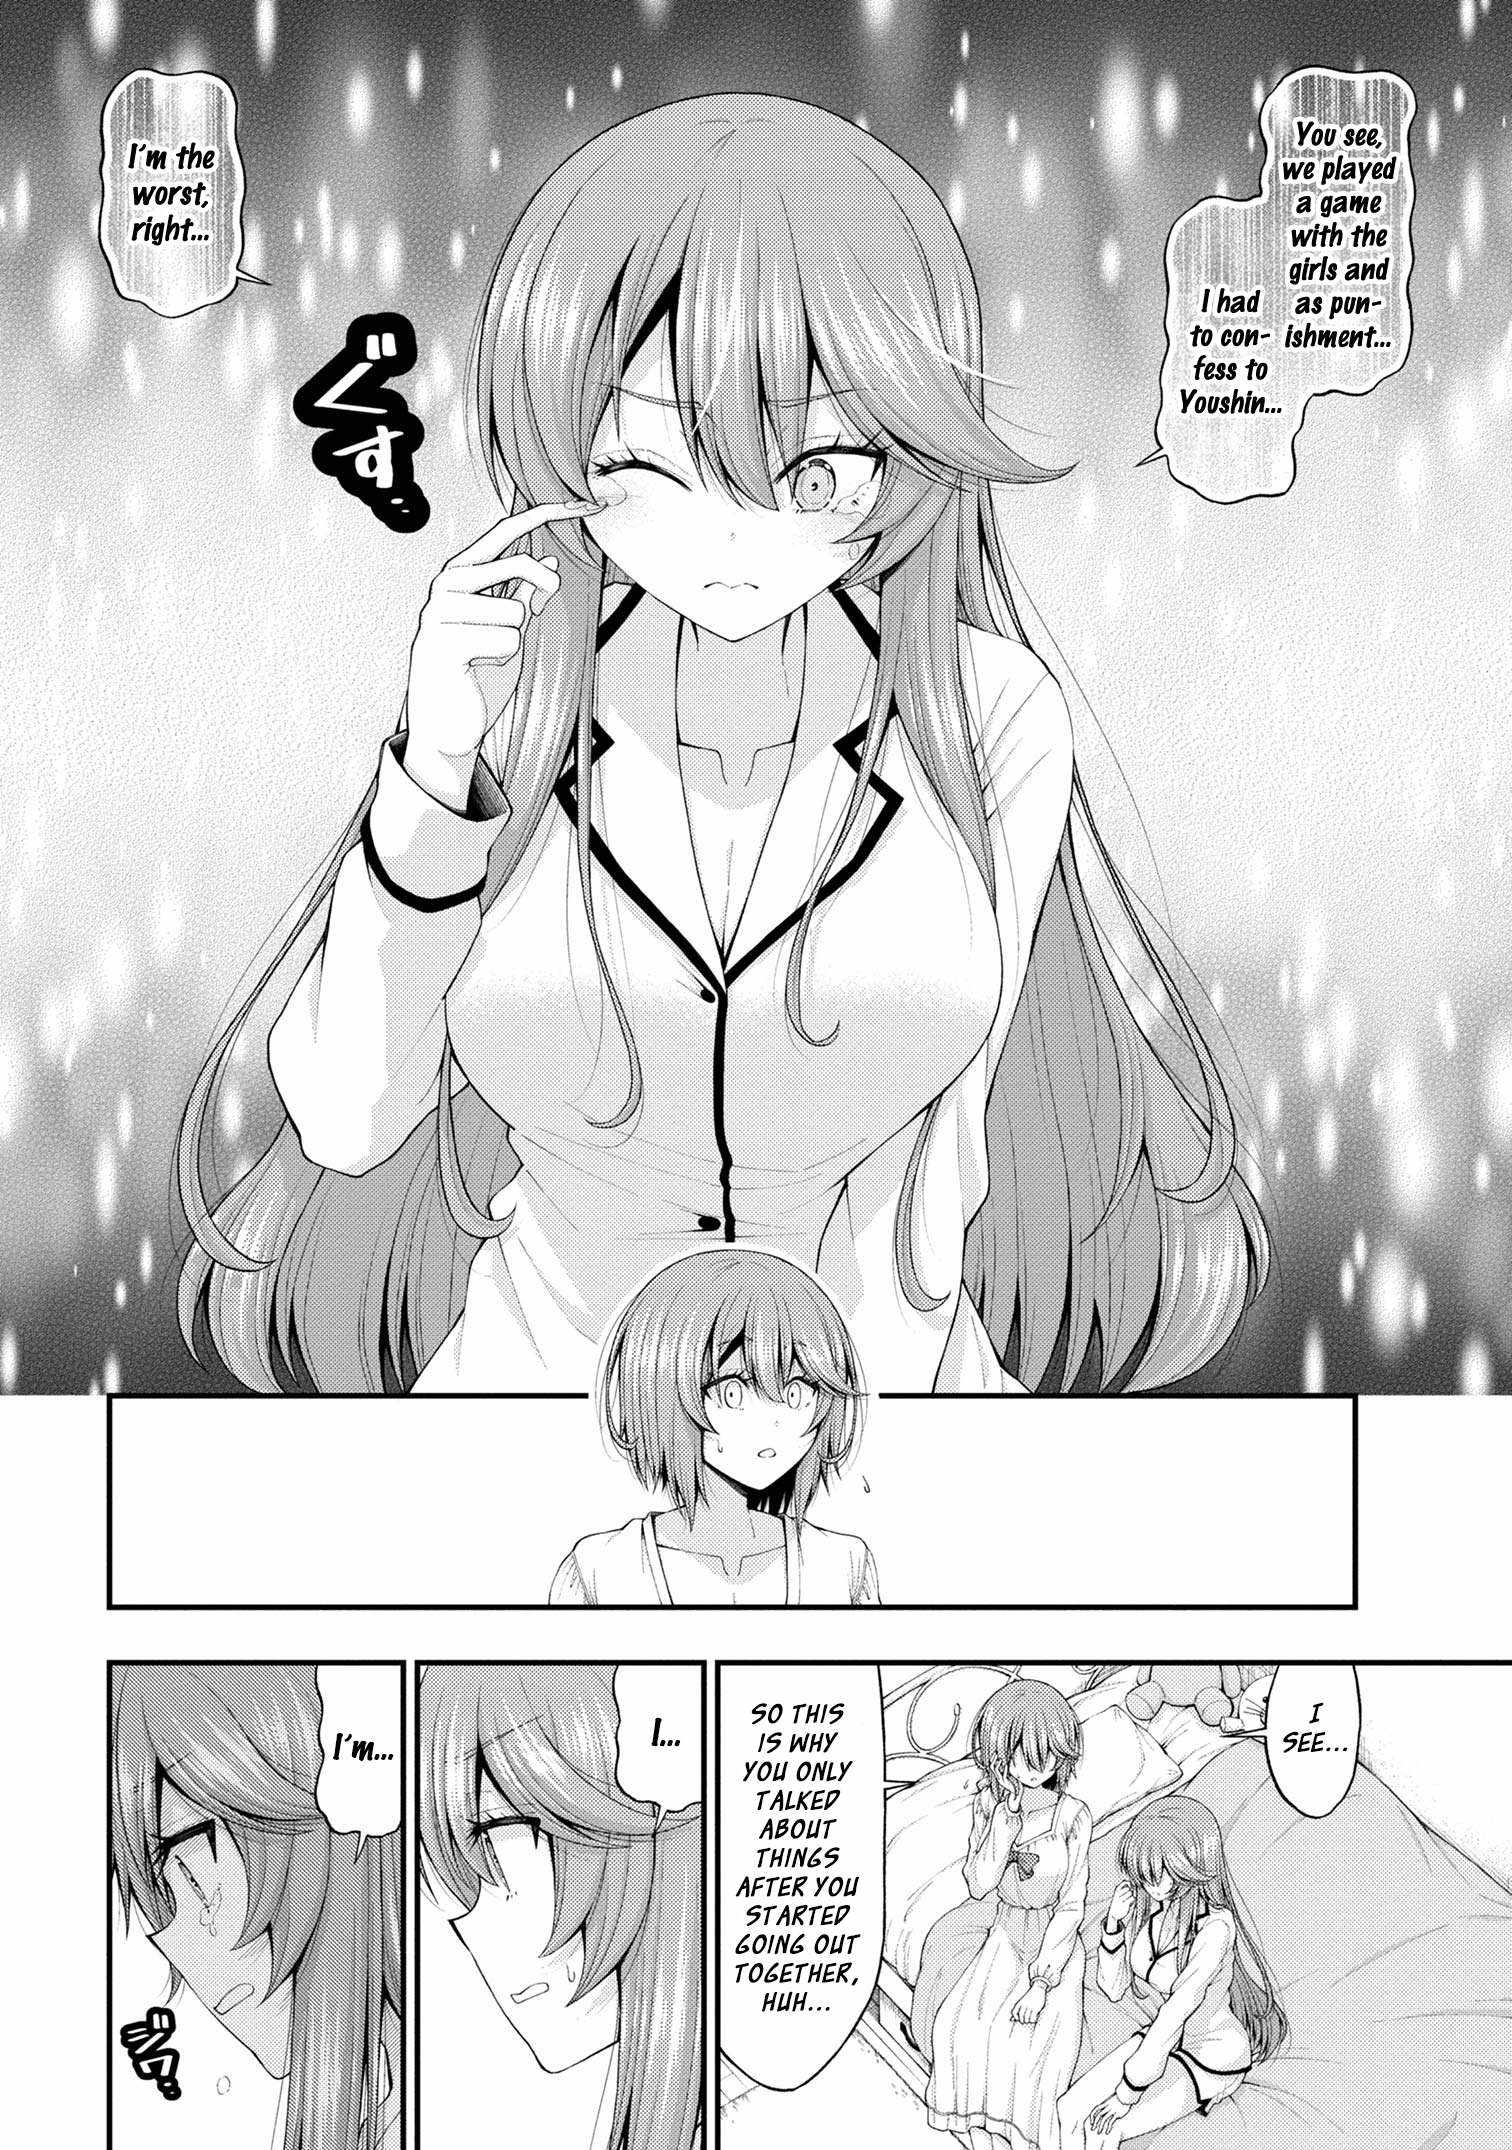 The Gal Who Was Meant to Confess to Me as a Game Punishment Has Apparently Fallen in Love with Me Chapter 12-5-eng-li - Page 17